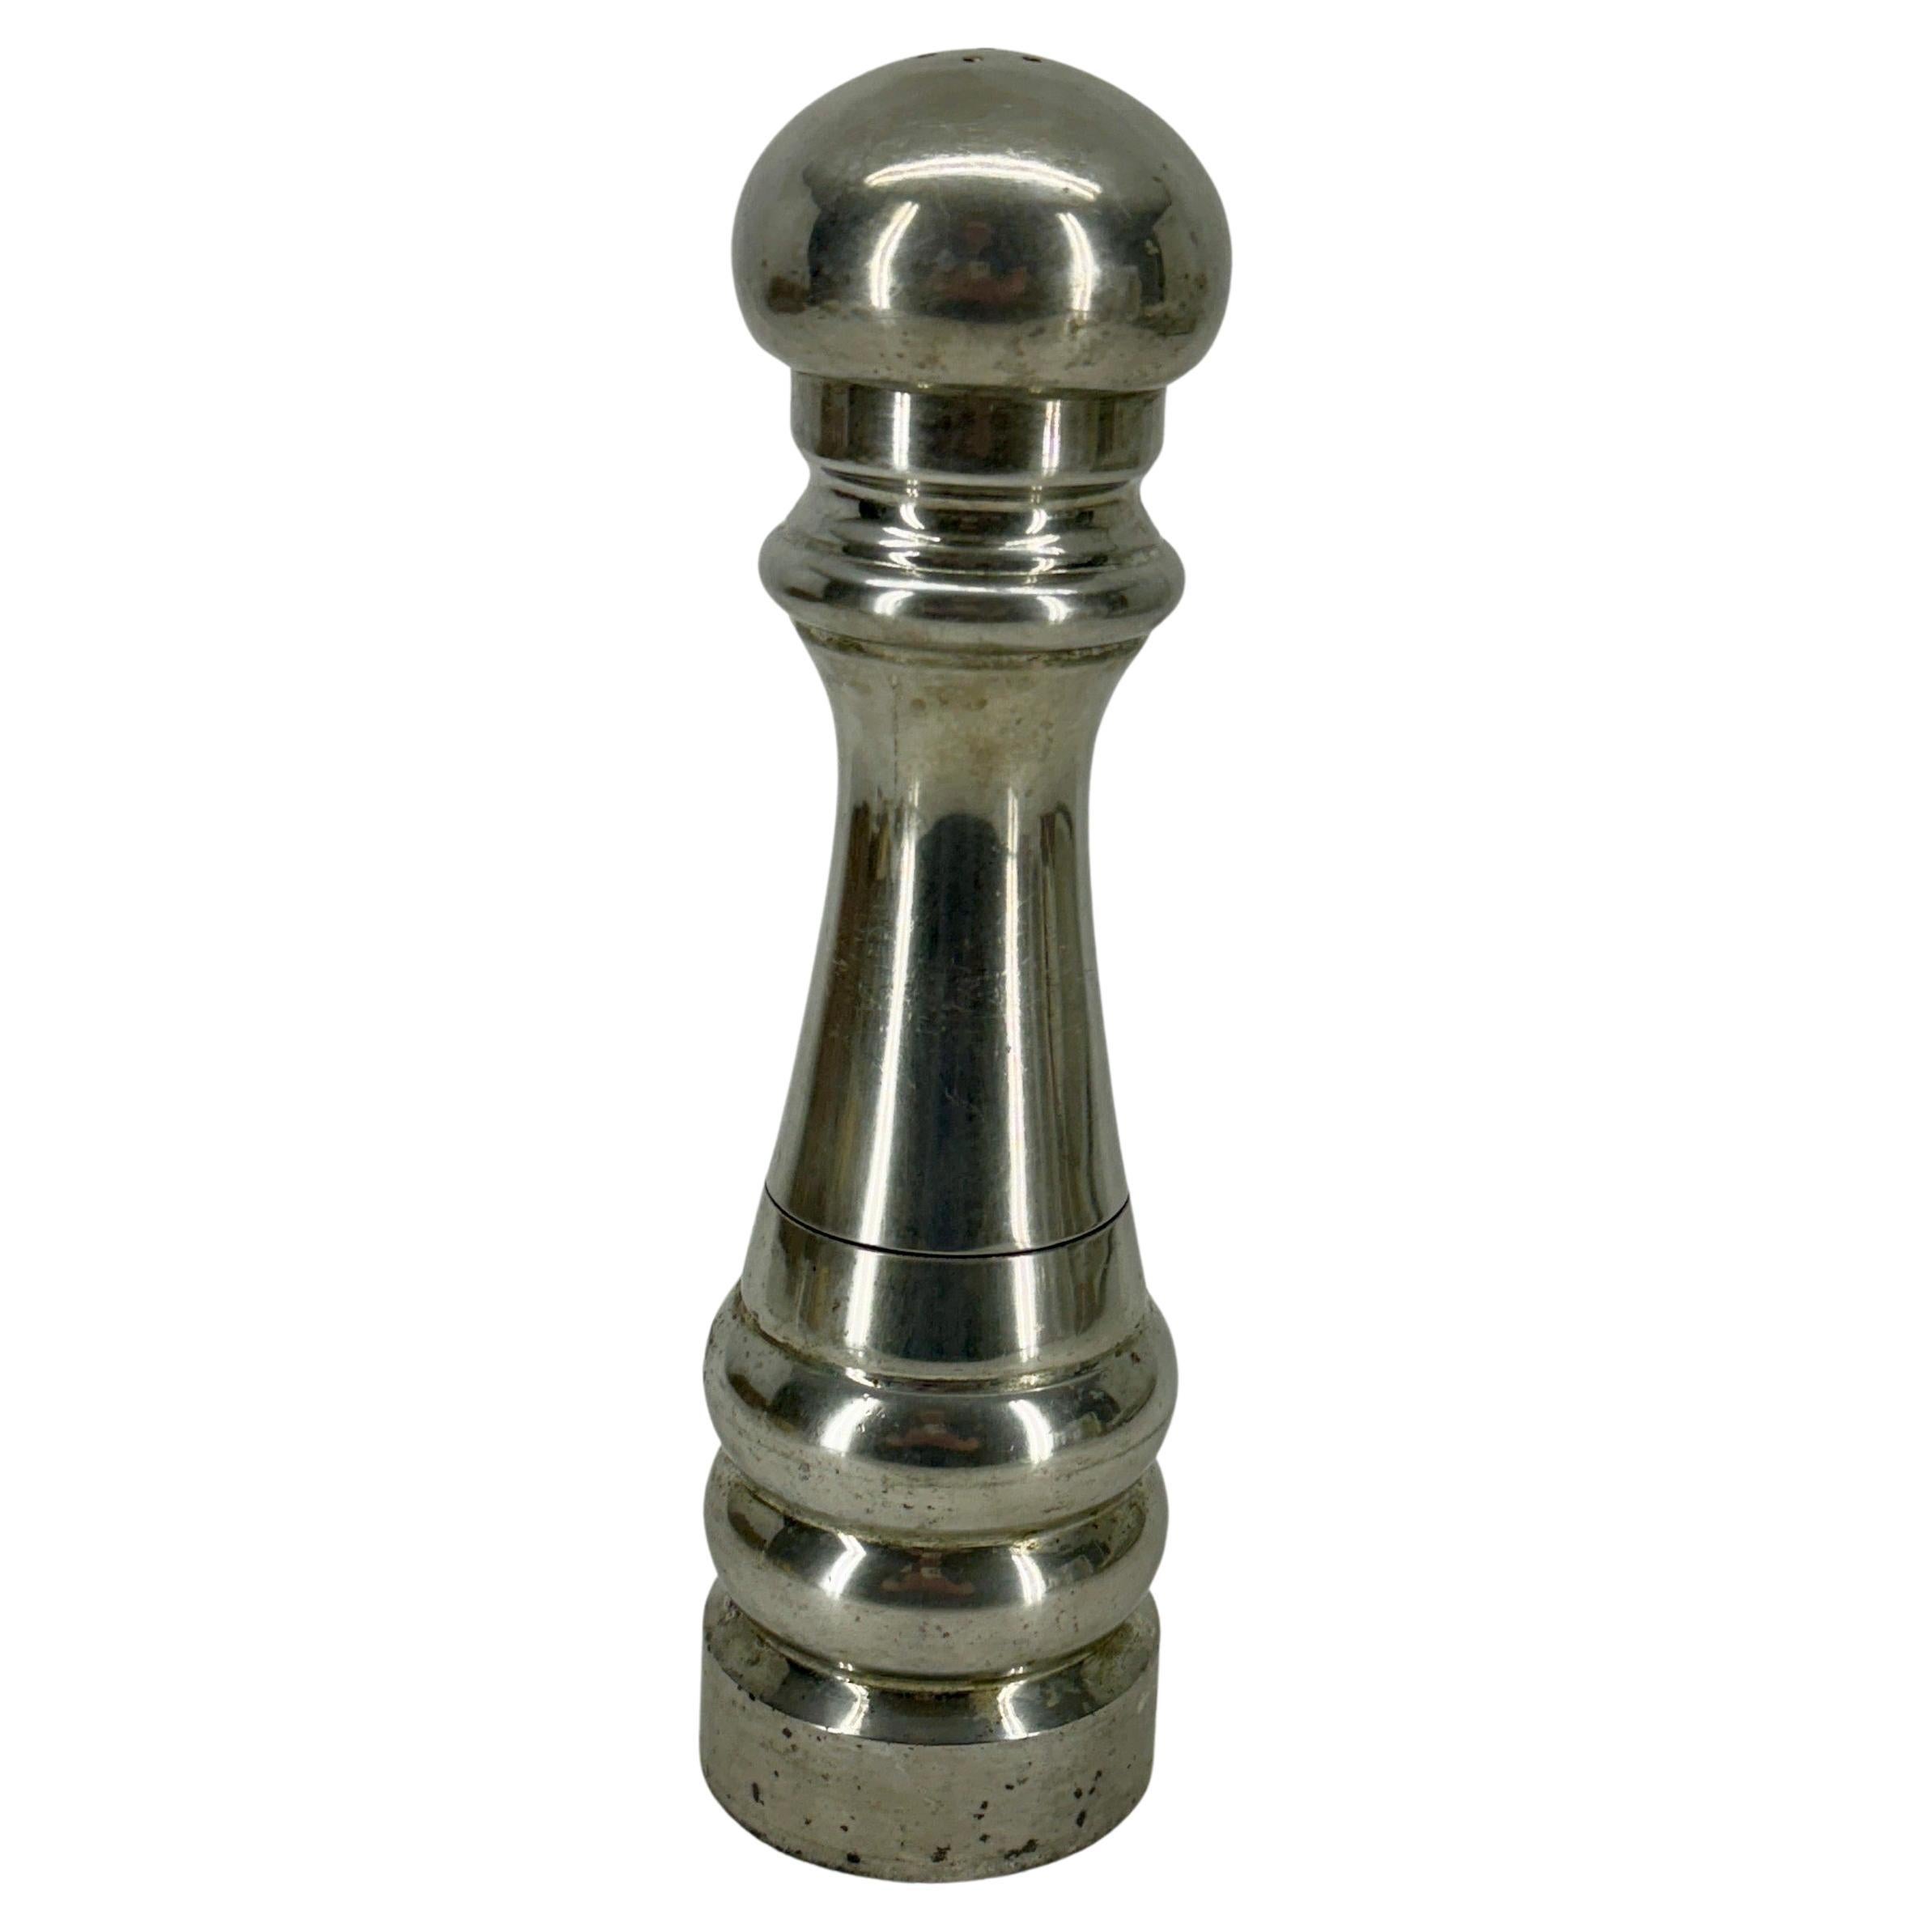 Pewter Salt and Pepper Shaker, MCM Italy

Tall and sturdy Vintage MCM Italian salt and pepper grinder or shaker with its original patina.  Just need to untwist when ready to refill. This pewter piece, marked Made in Italy on the bottom, would make a